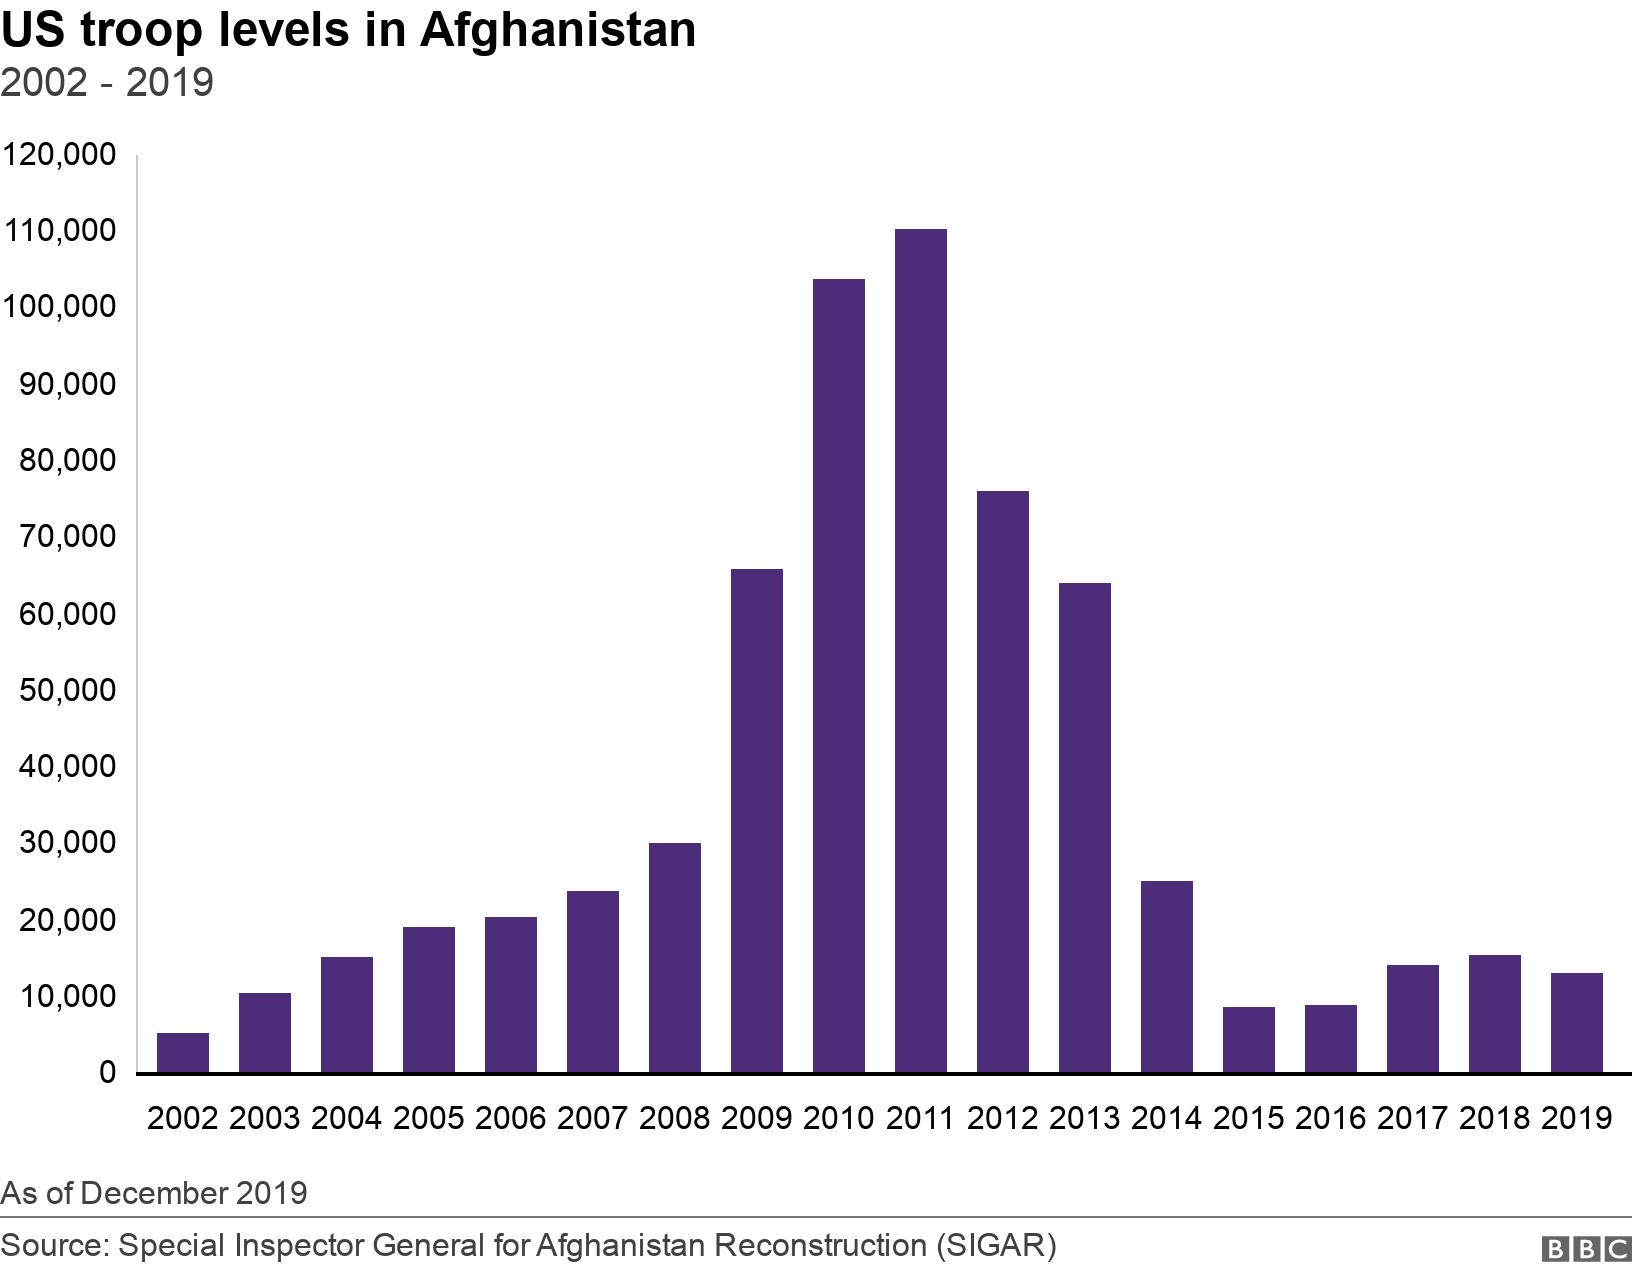 US troop levels in Afghanistan. 2002 - 2019. Chart showing US troop levels in Afghanistan from 2002 to 2019 As of December 2019.